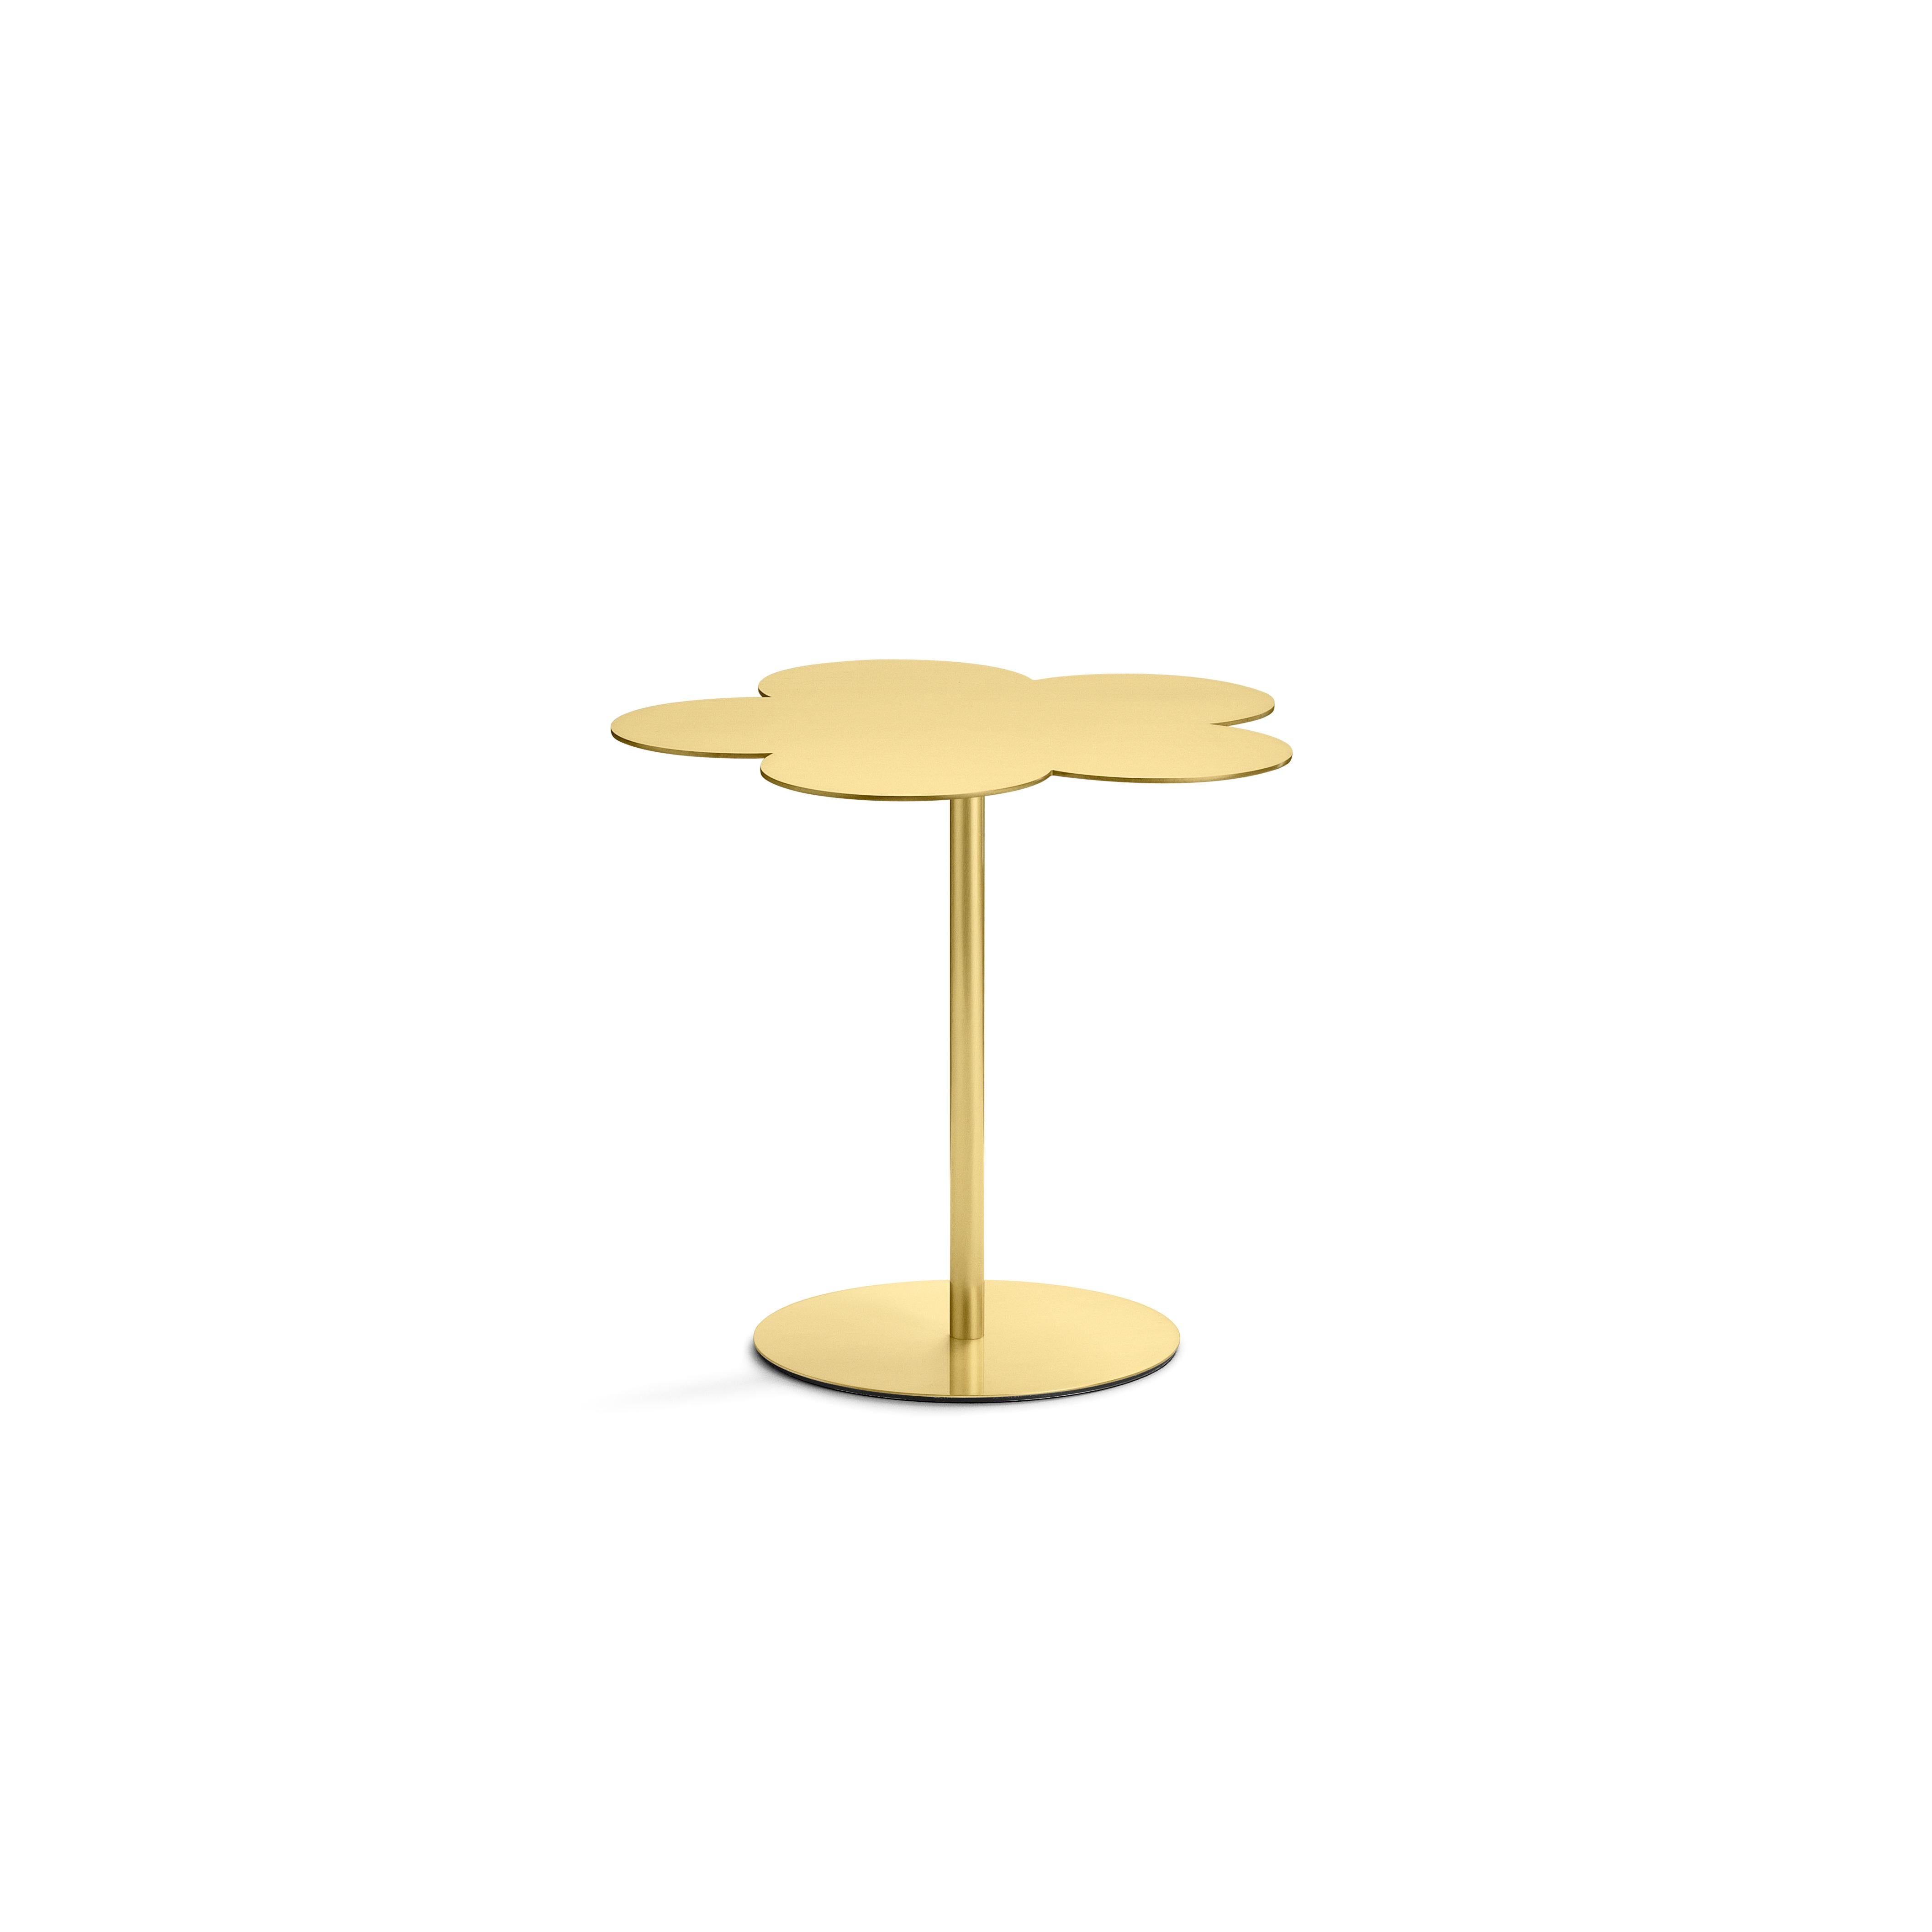 Medium coffee side table
The natural element is the focus of this project of a coffee table where the surface is shaped like a stylized flower. A triptych of distinct elements which rest on a circular foot and, given the different heights, can be